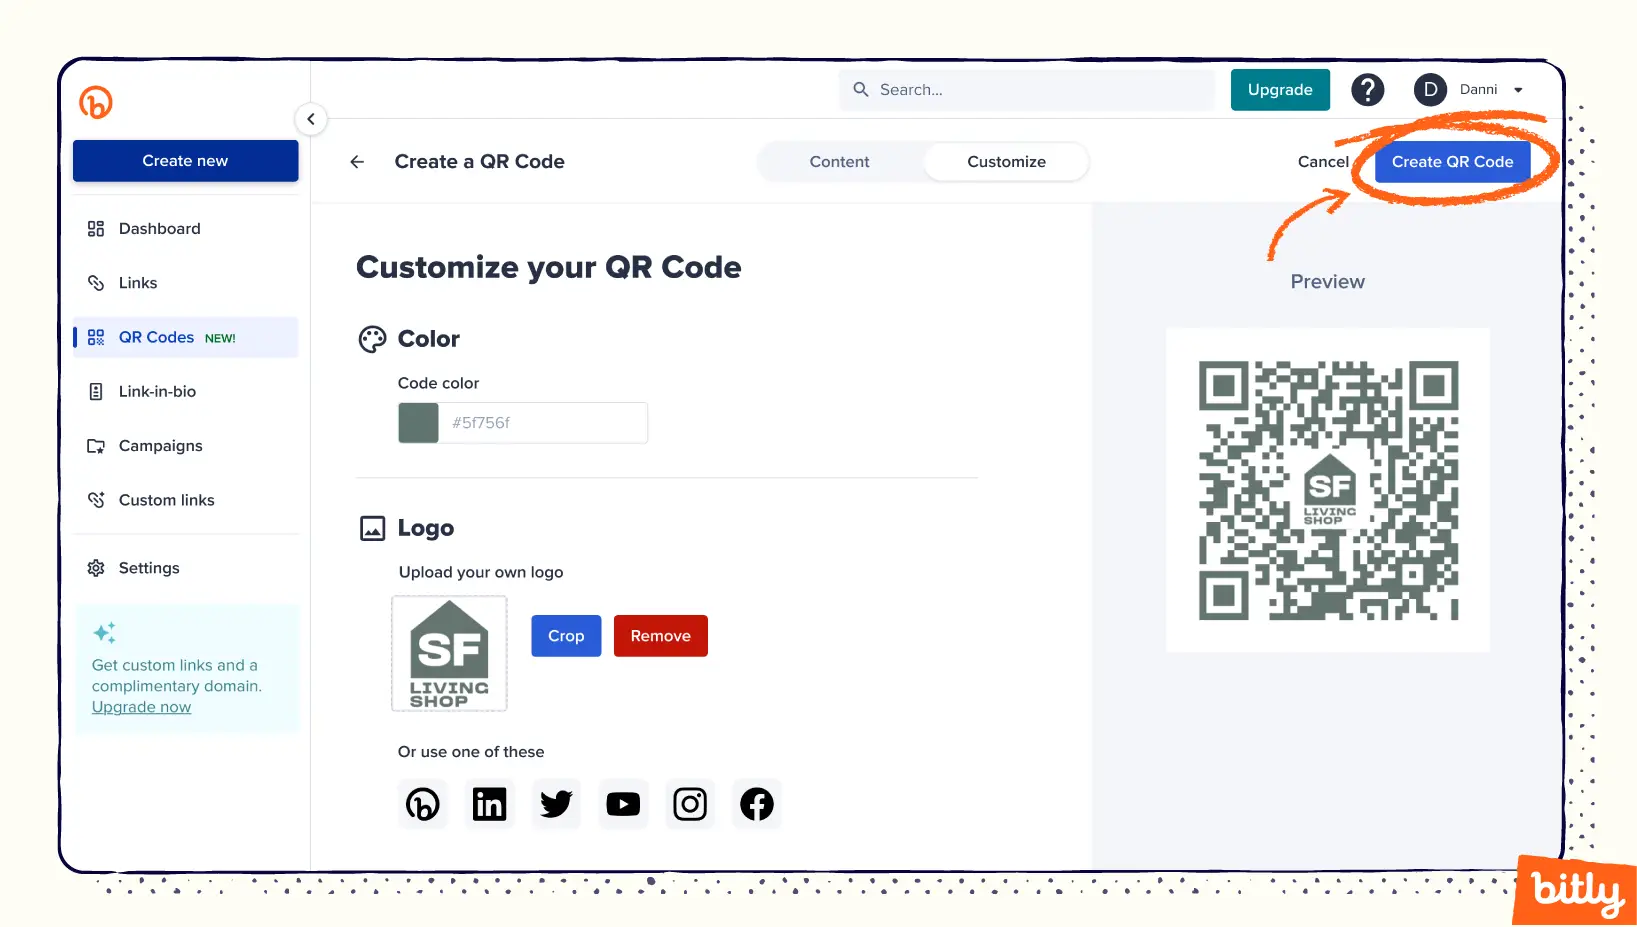 The Bitly QR Code creator with an arrow pointing to the Create QR Code button.